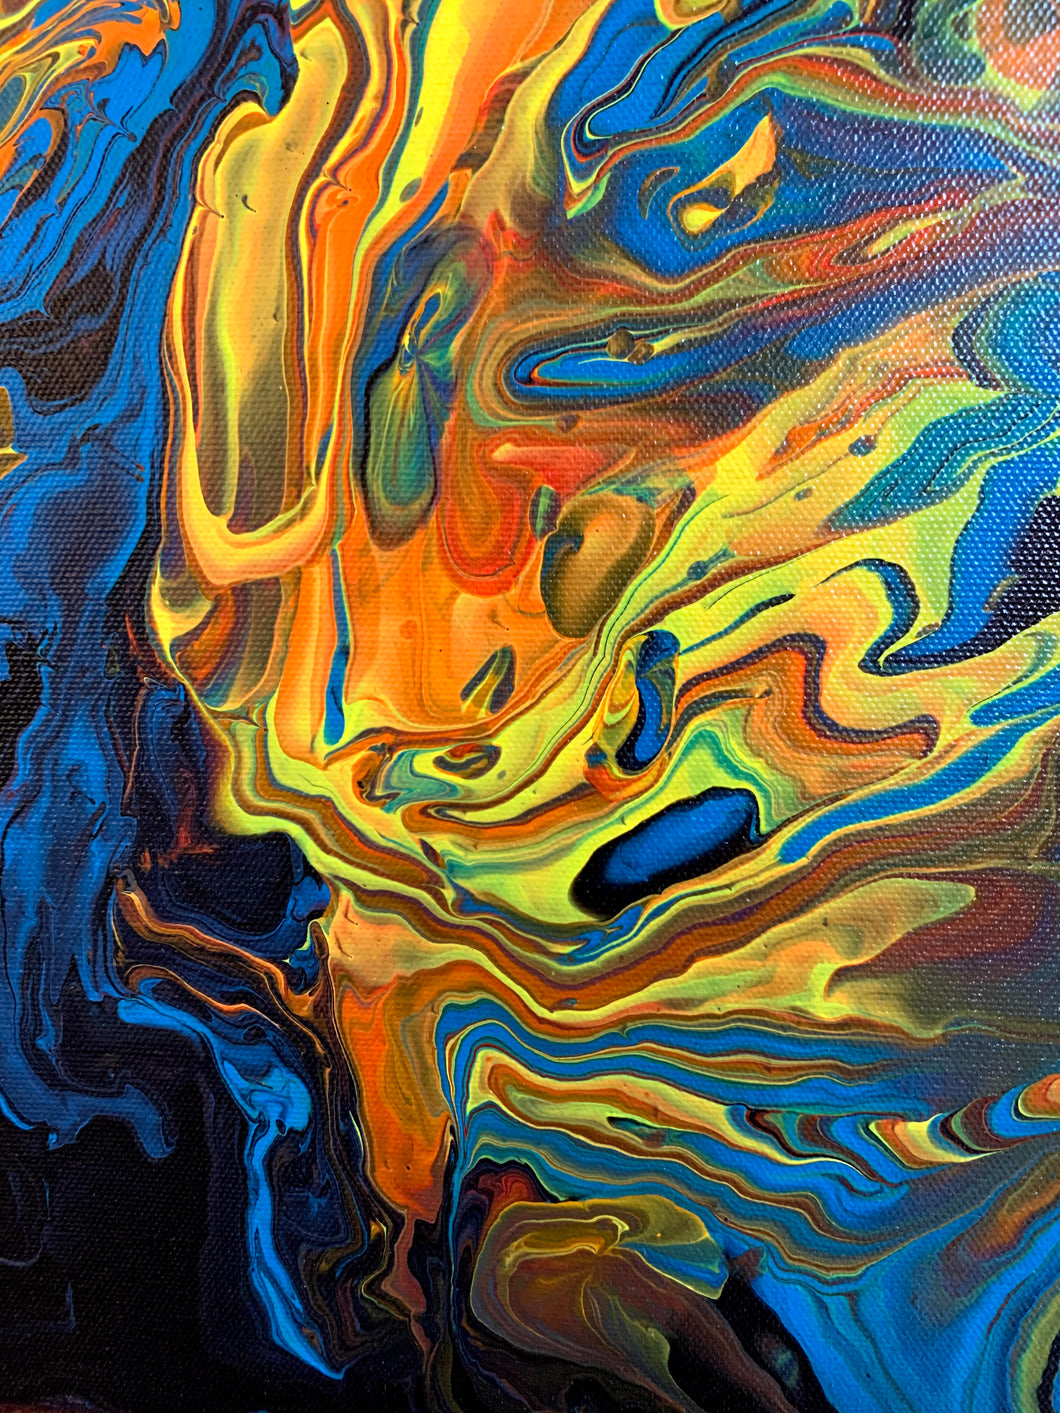 Psychedelic Blues - 11x14